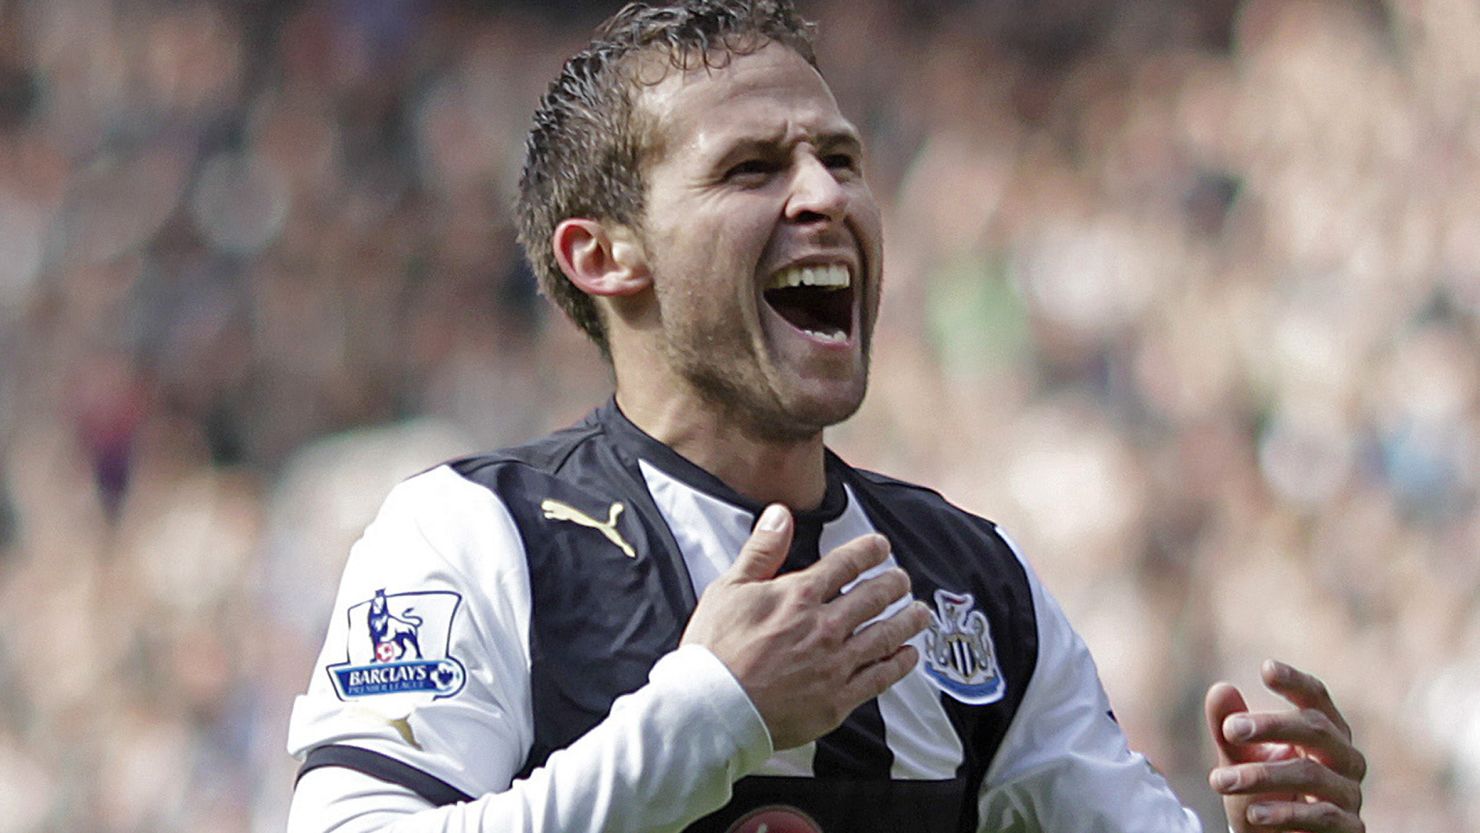 Newcastle United's French midfielder Yohan Cabaye celebrates after scoring his second goal against Stoke City.